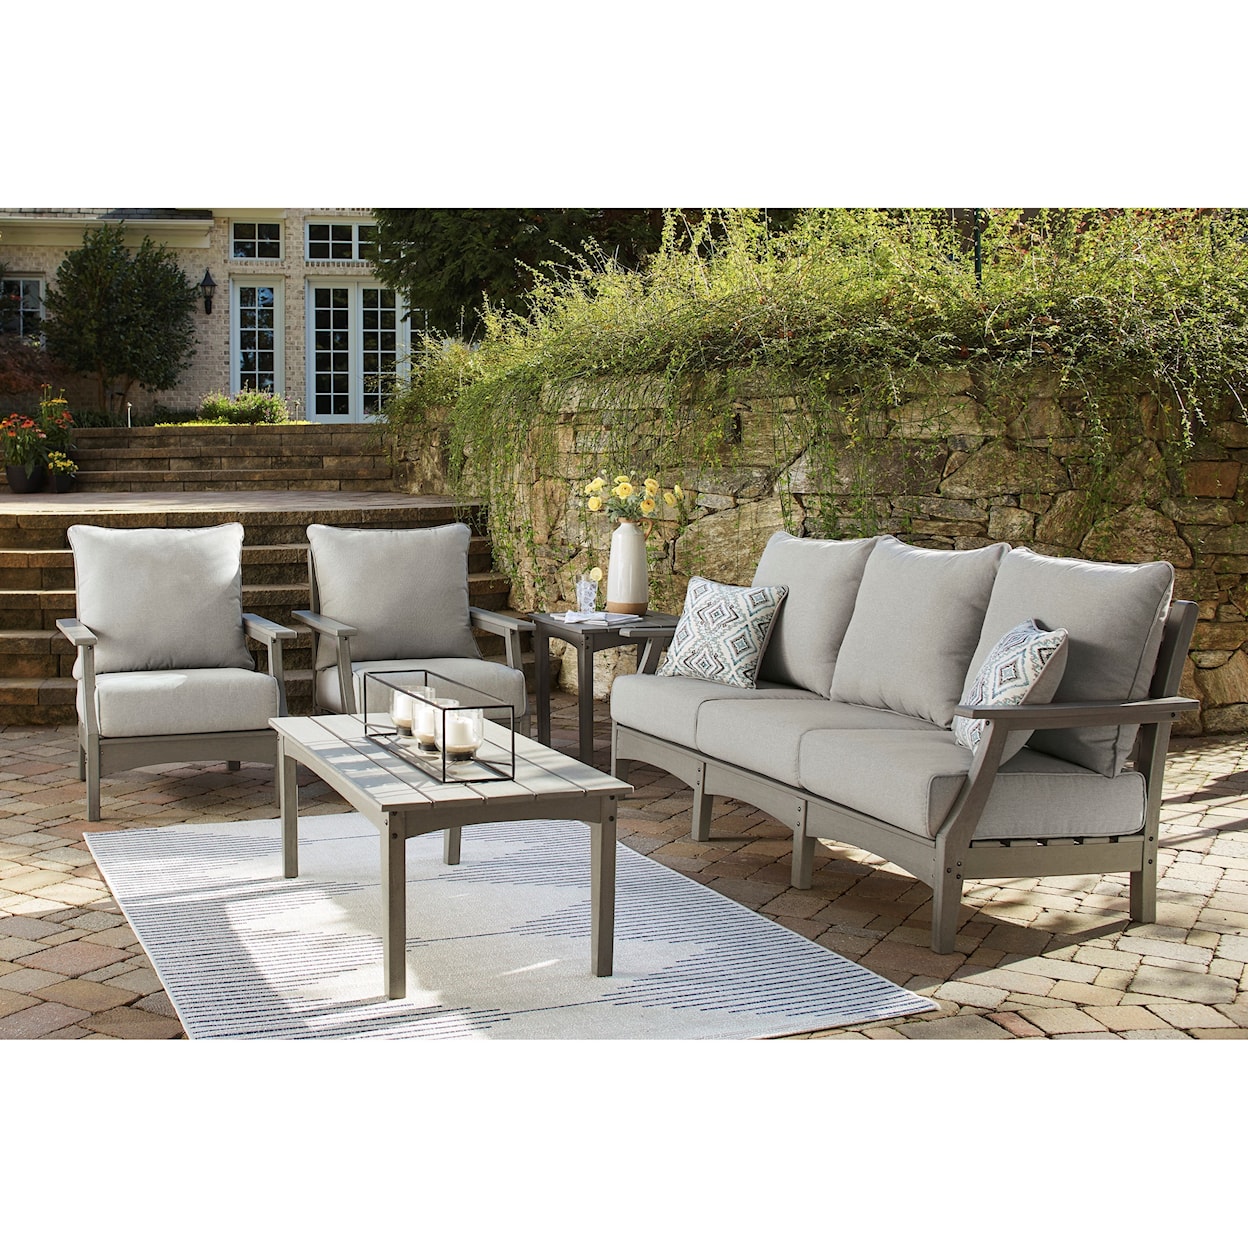 Ashley Signature Design Visola Outdoor Sofa, 2 Chairs, and Table Set